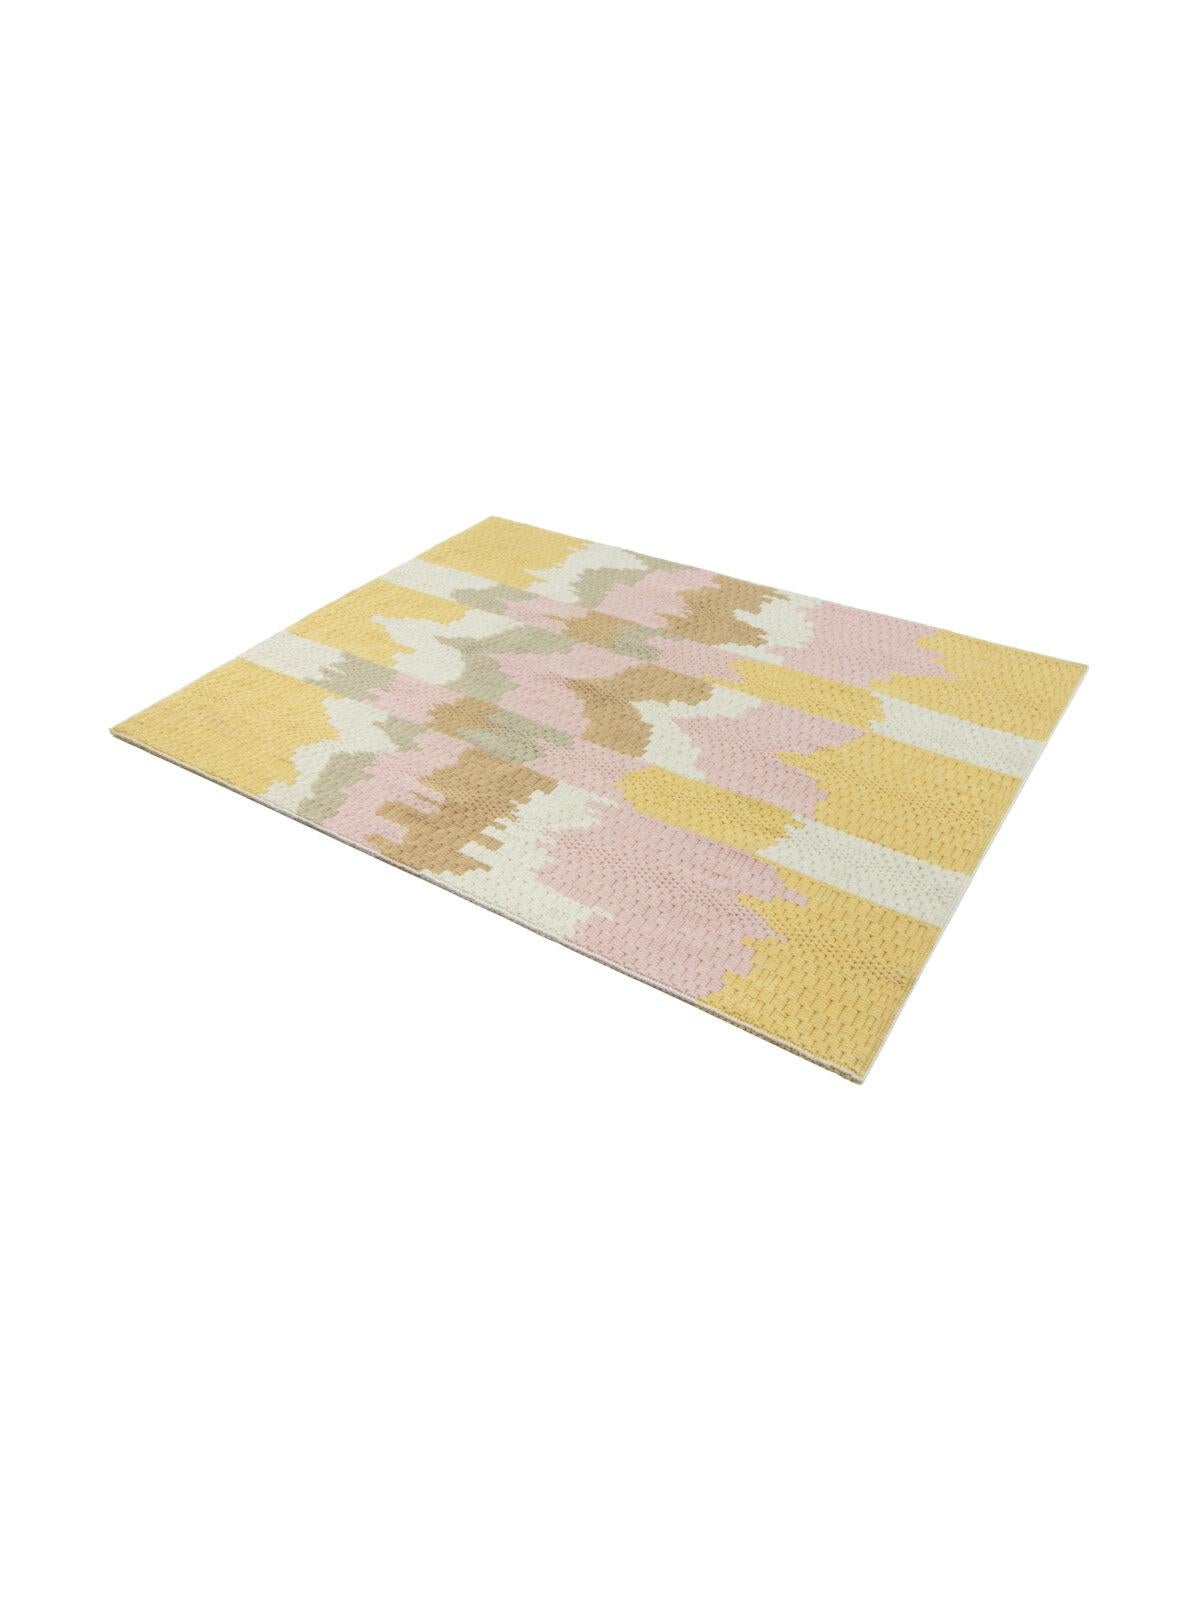 cc-tapis SONORA PINK handmade rug by Patricia Urquiola In New Condition For Sale In Brooklyn, NY